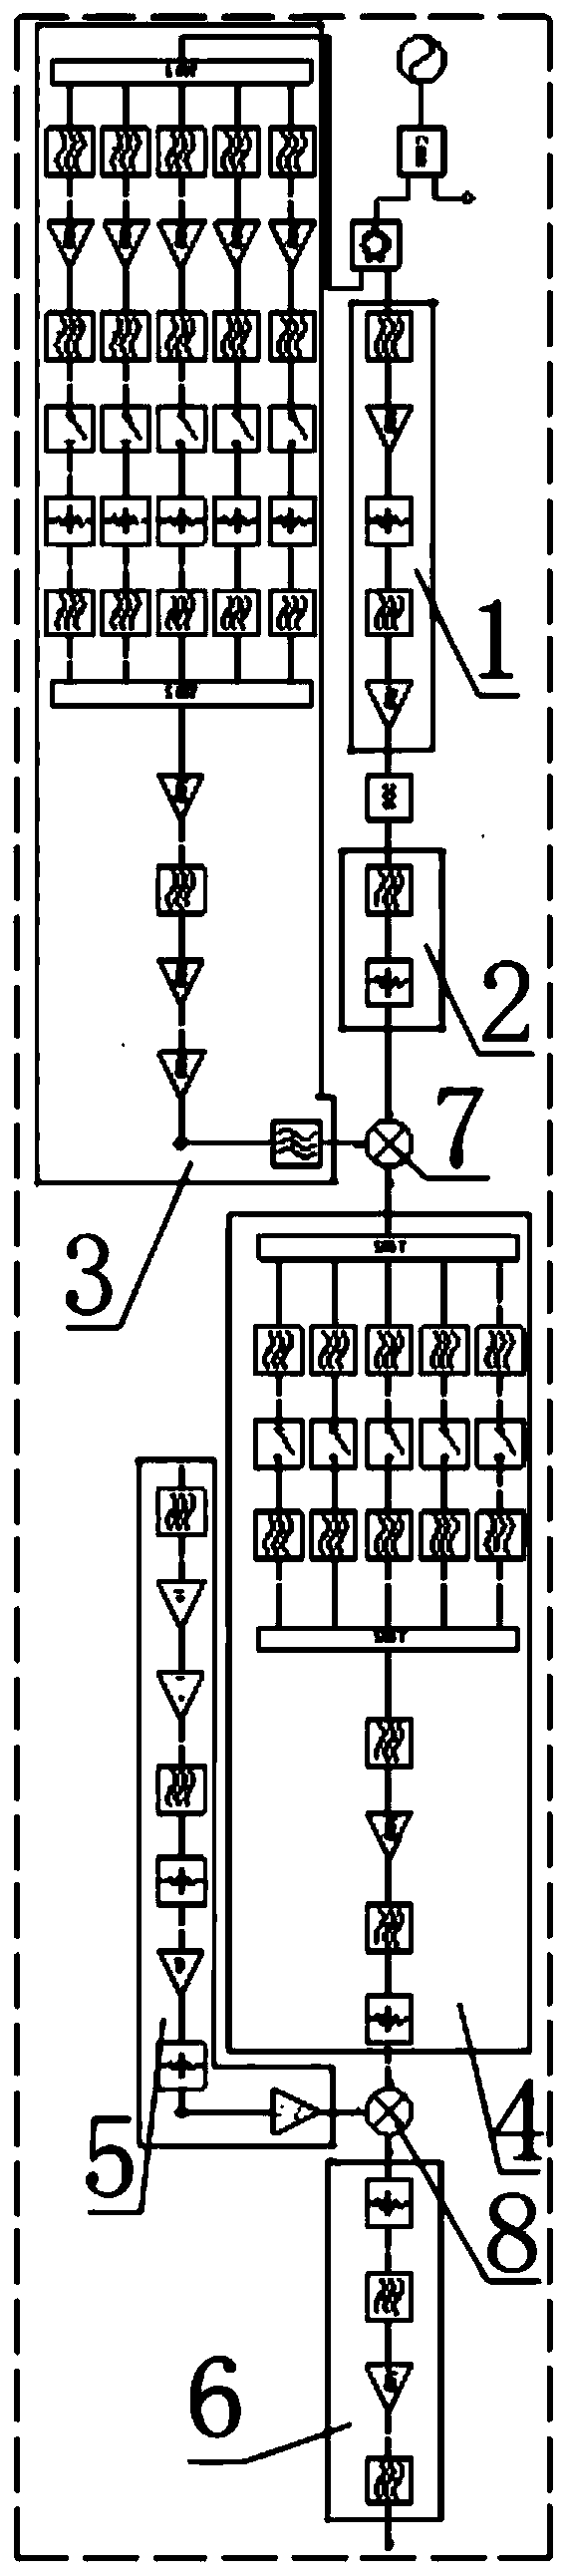 A high-spurious-suppression fine-stepping agile frequency conversion frequency synthesis device and method